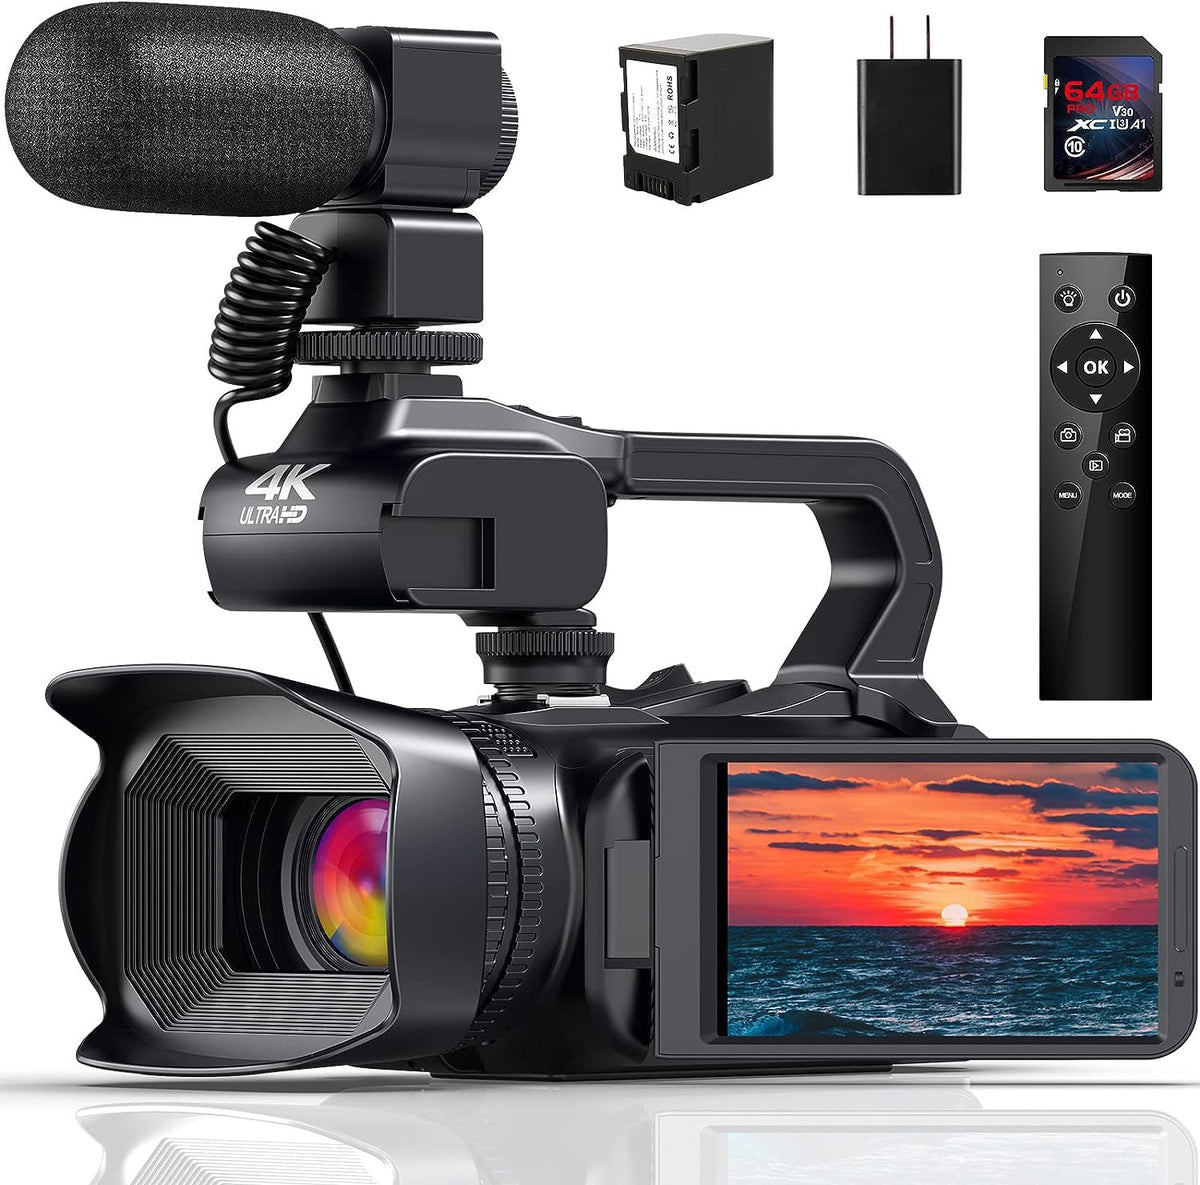 MERVNE 4K Video Camera Camcorder, 64MP 60FPS 18X Digital Zoom Auto Focus Vlogging Camera for YouTube, HD WiFi Video Camera with 4500mAh Battery, SD Card, Stabilizer, Mic, Remote Control and Charger